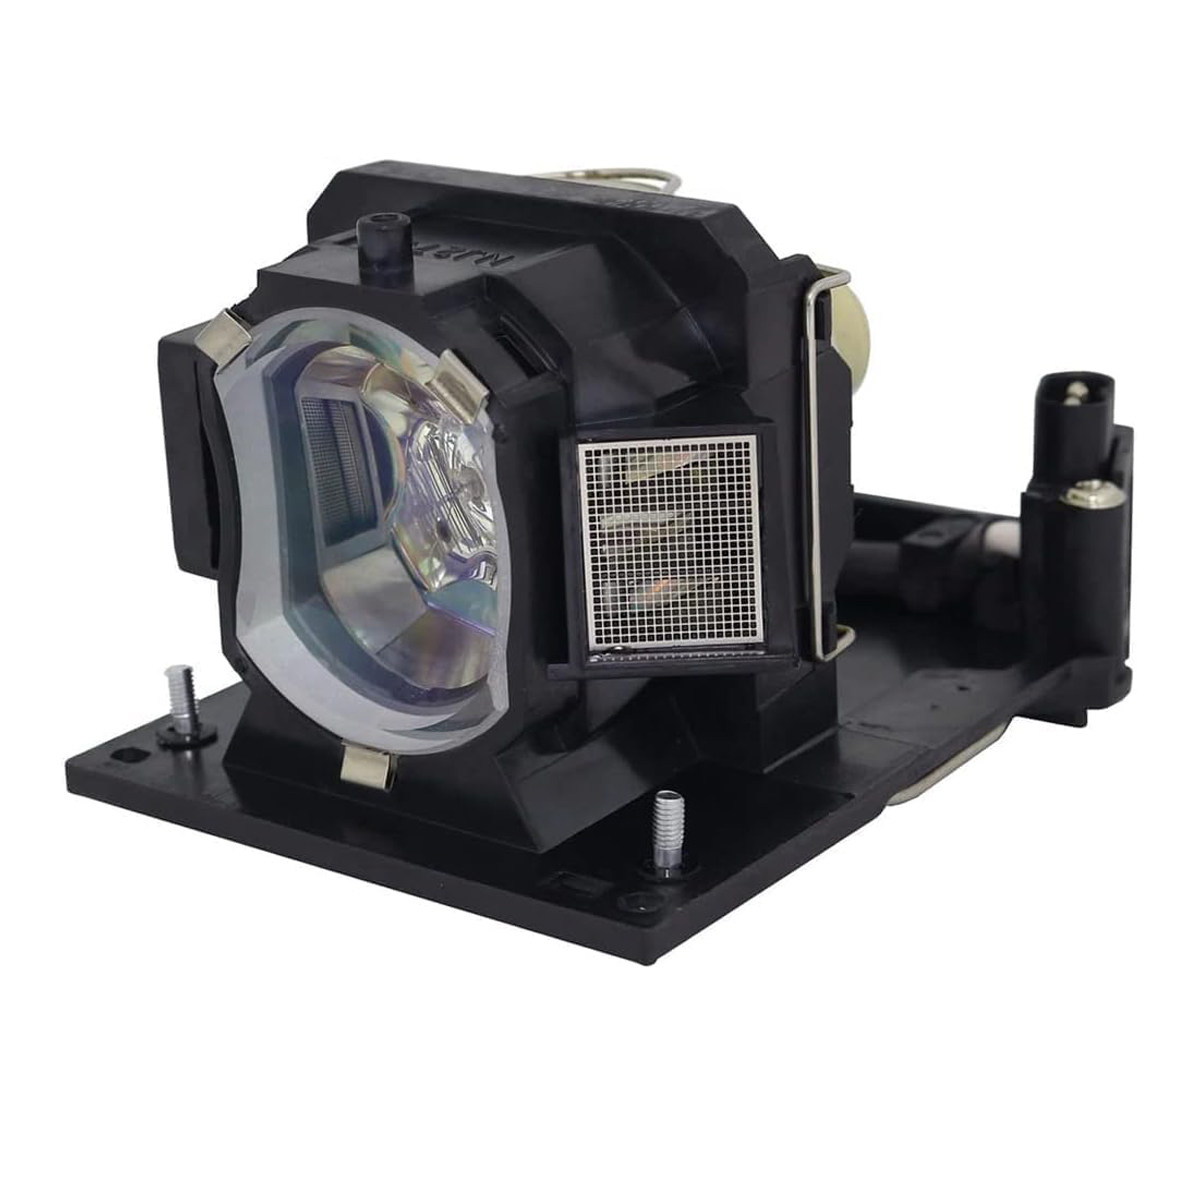 Replacement Projector lamp DT01433 For Hitachi CP-EX250 CP-EX250N CP-EX300 CP-EX300N